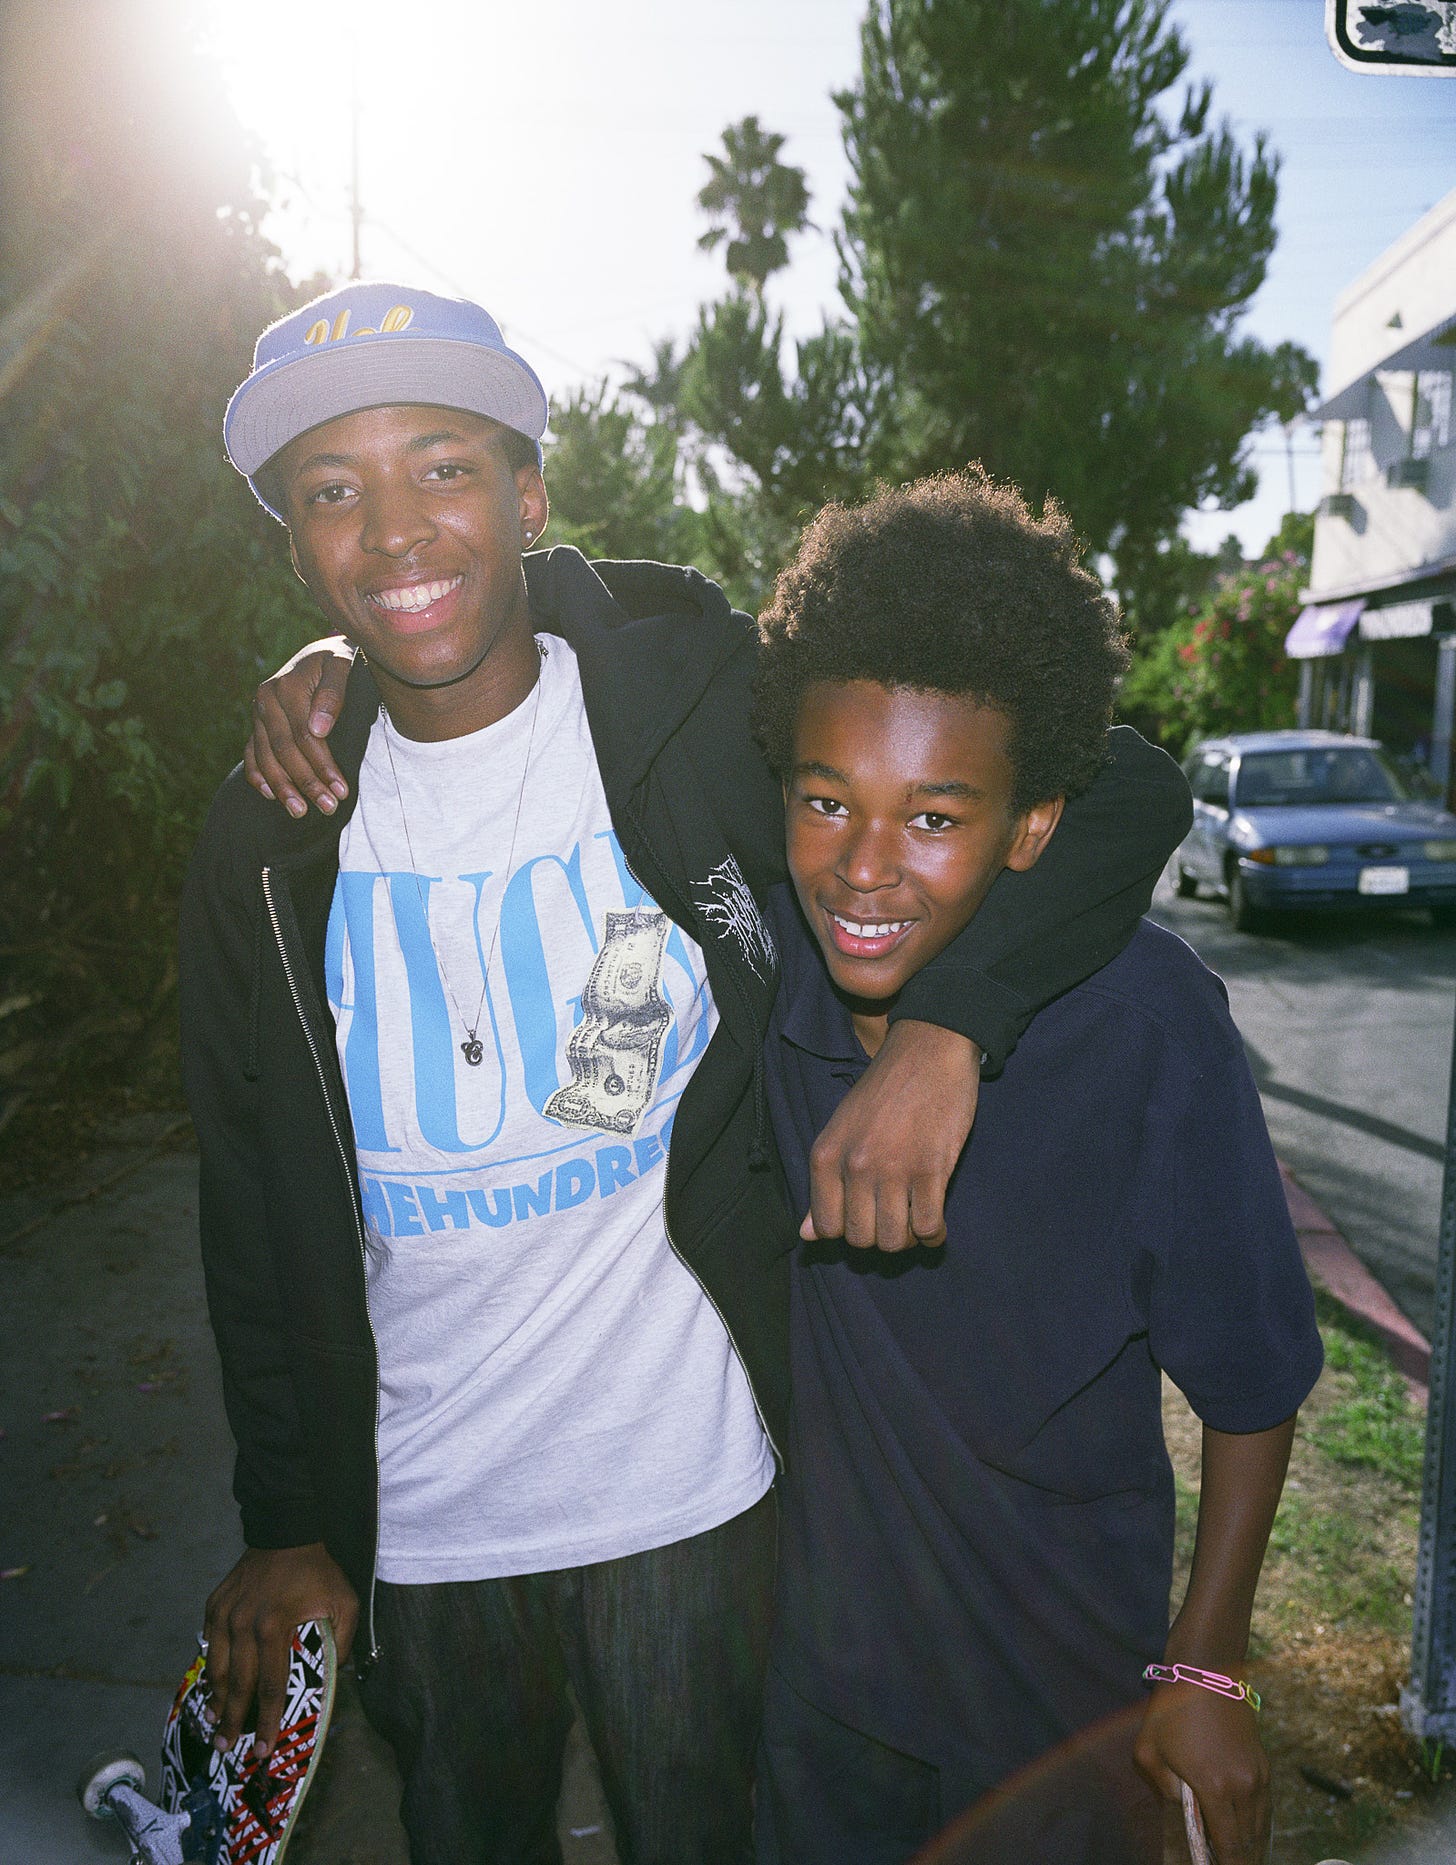 Photo of two teenagers, Fairfax District, Los Angeles